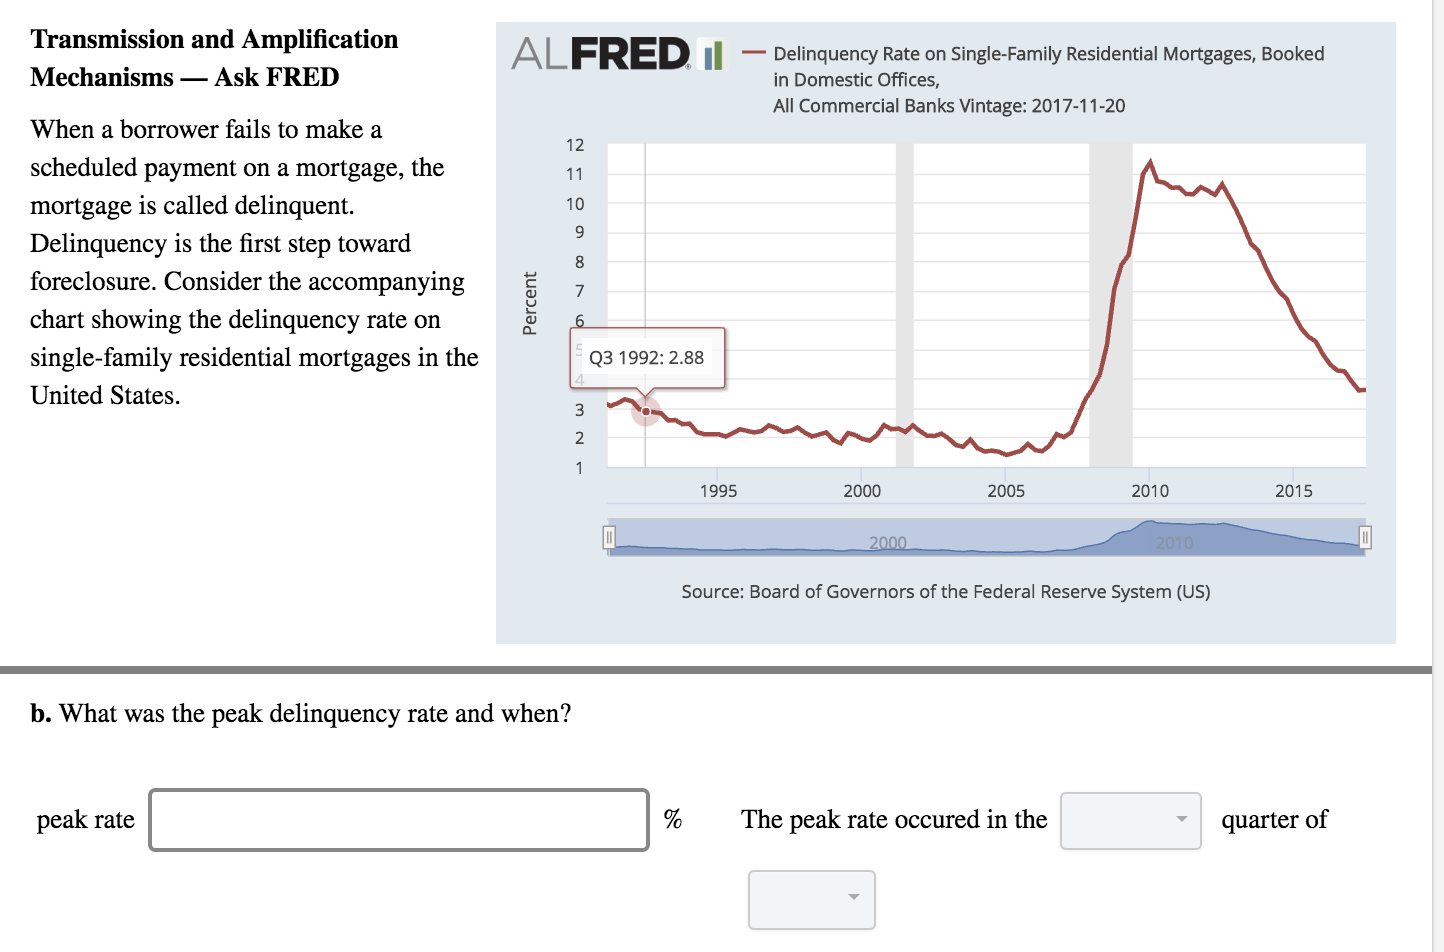 Transmission and Amplification
Mechanisms- Ask FRED
When a borrower fails to make a
scheduled payment on a mortgage, the
mortgage is called delinquent.
Delinquency is the first step toward
foreclosure. Consider the accompanying
chart showing the delinquency rate on
single-family residential mortgages in the
United States.
ALFRED
-Delinquency Rate on Single-Family Residential Mortgages, Booked
in Domestic Offices
All Commercial Banks Vintage: 2017-11-20
12
10
8
Q3 1992: 2.88
2
1995
2000
2005
2010
2015
Source: Board of Governors of the Federal Reserve System (US)
b. What was the peak delinquency rate and when?
peak rate
%
The peak rate occured in the
quarter of
